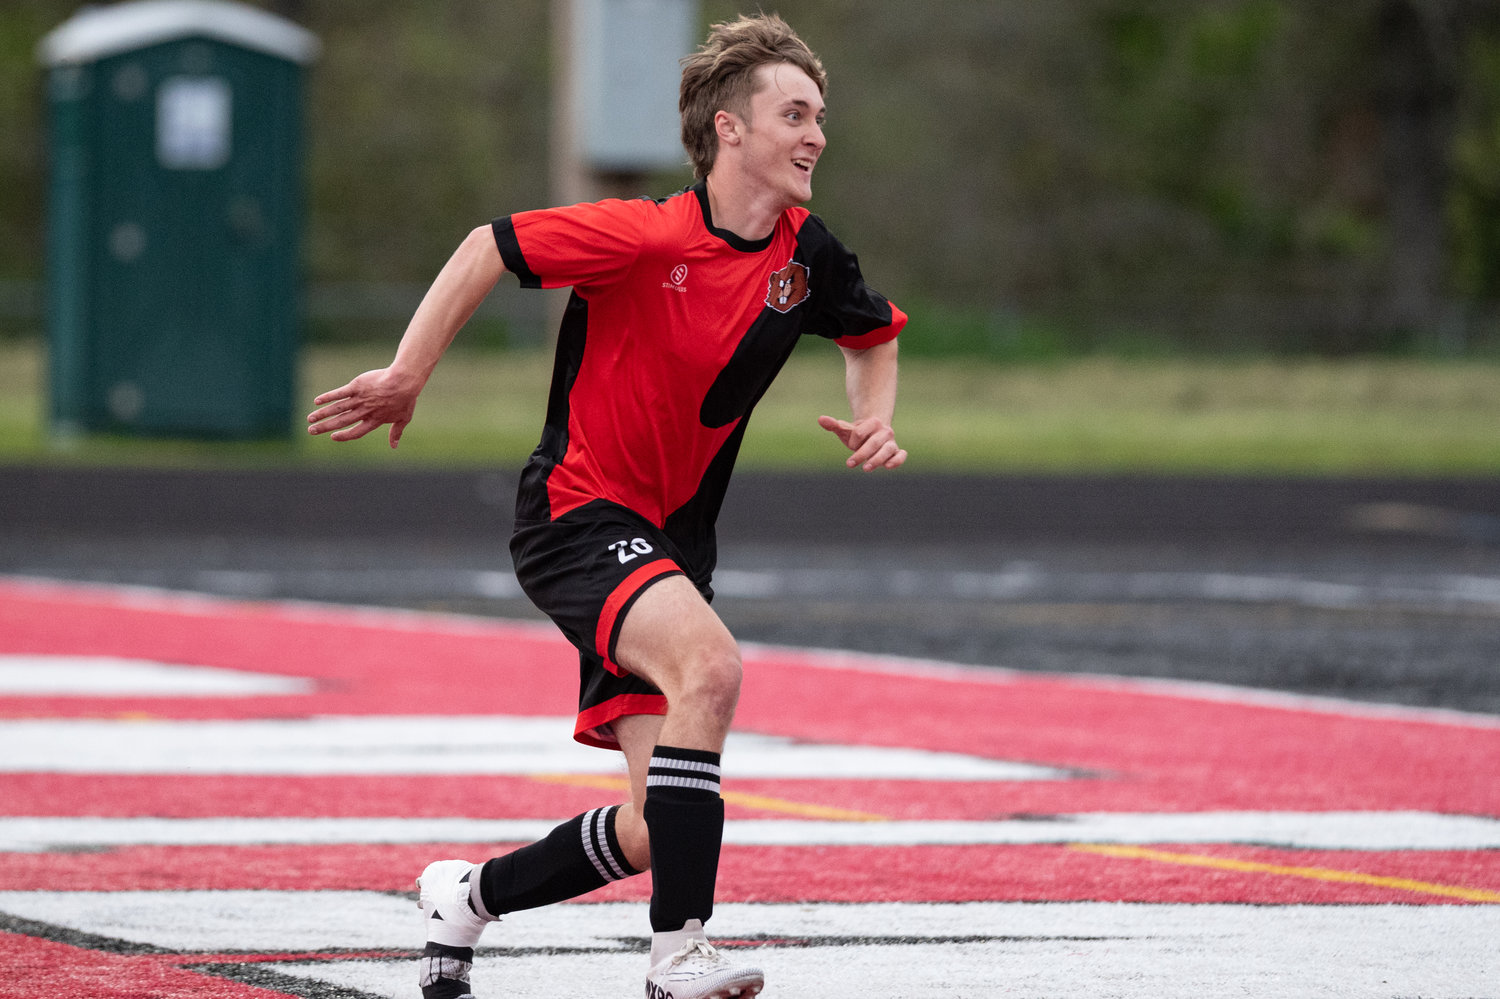 Tenino's Triston Whitaker celebrates after his goal in the second half of a win against Ilwaco May 4.